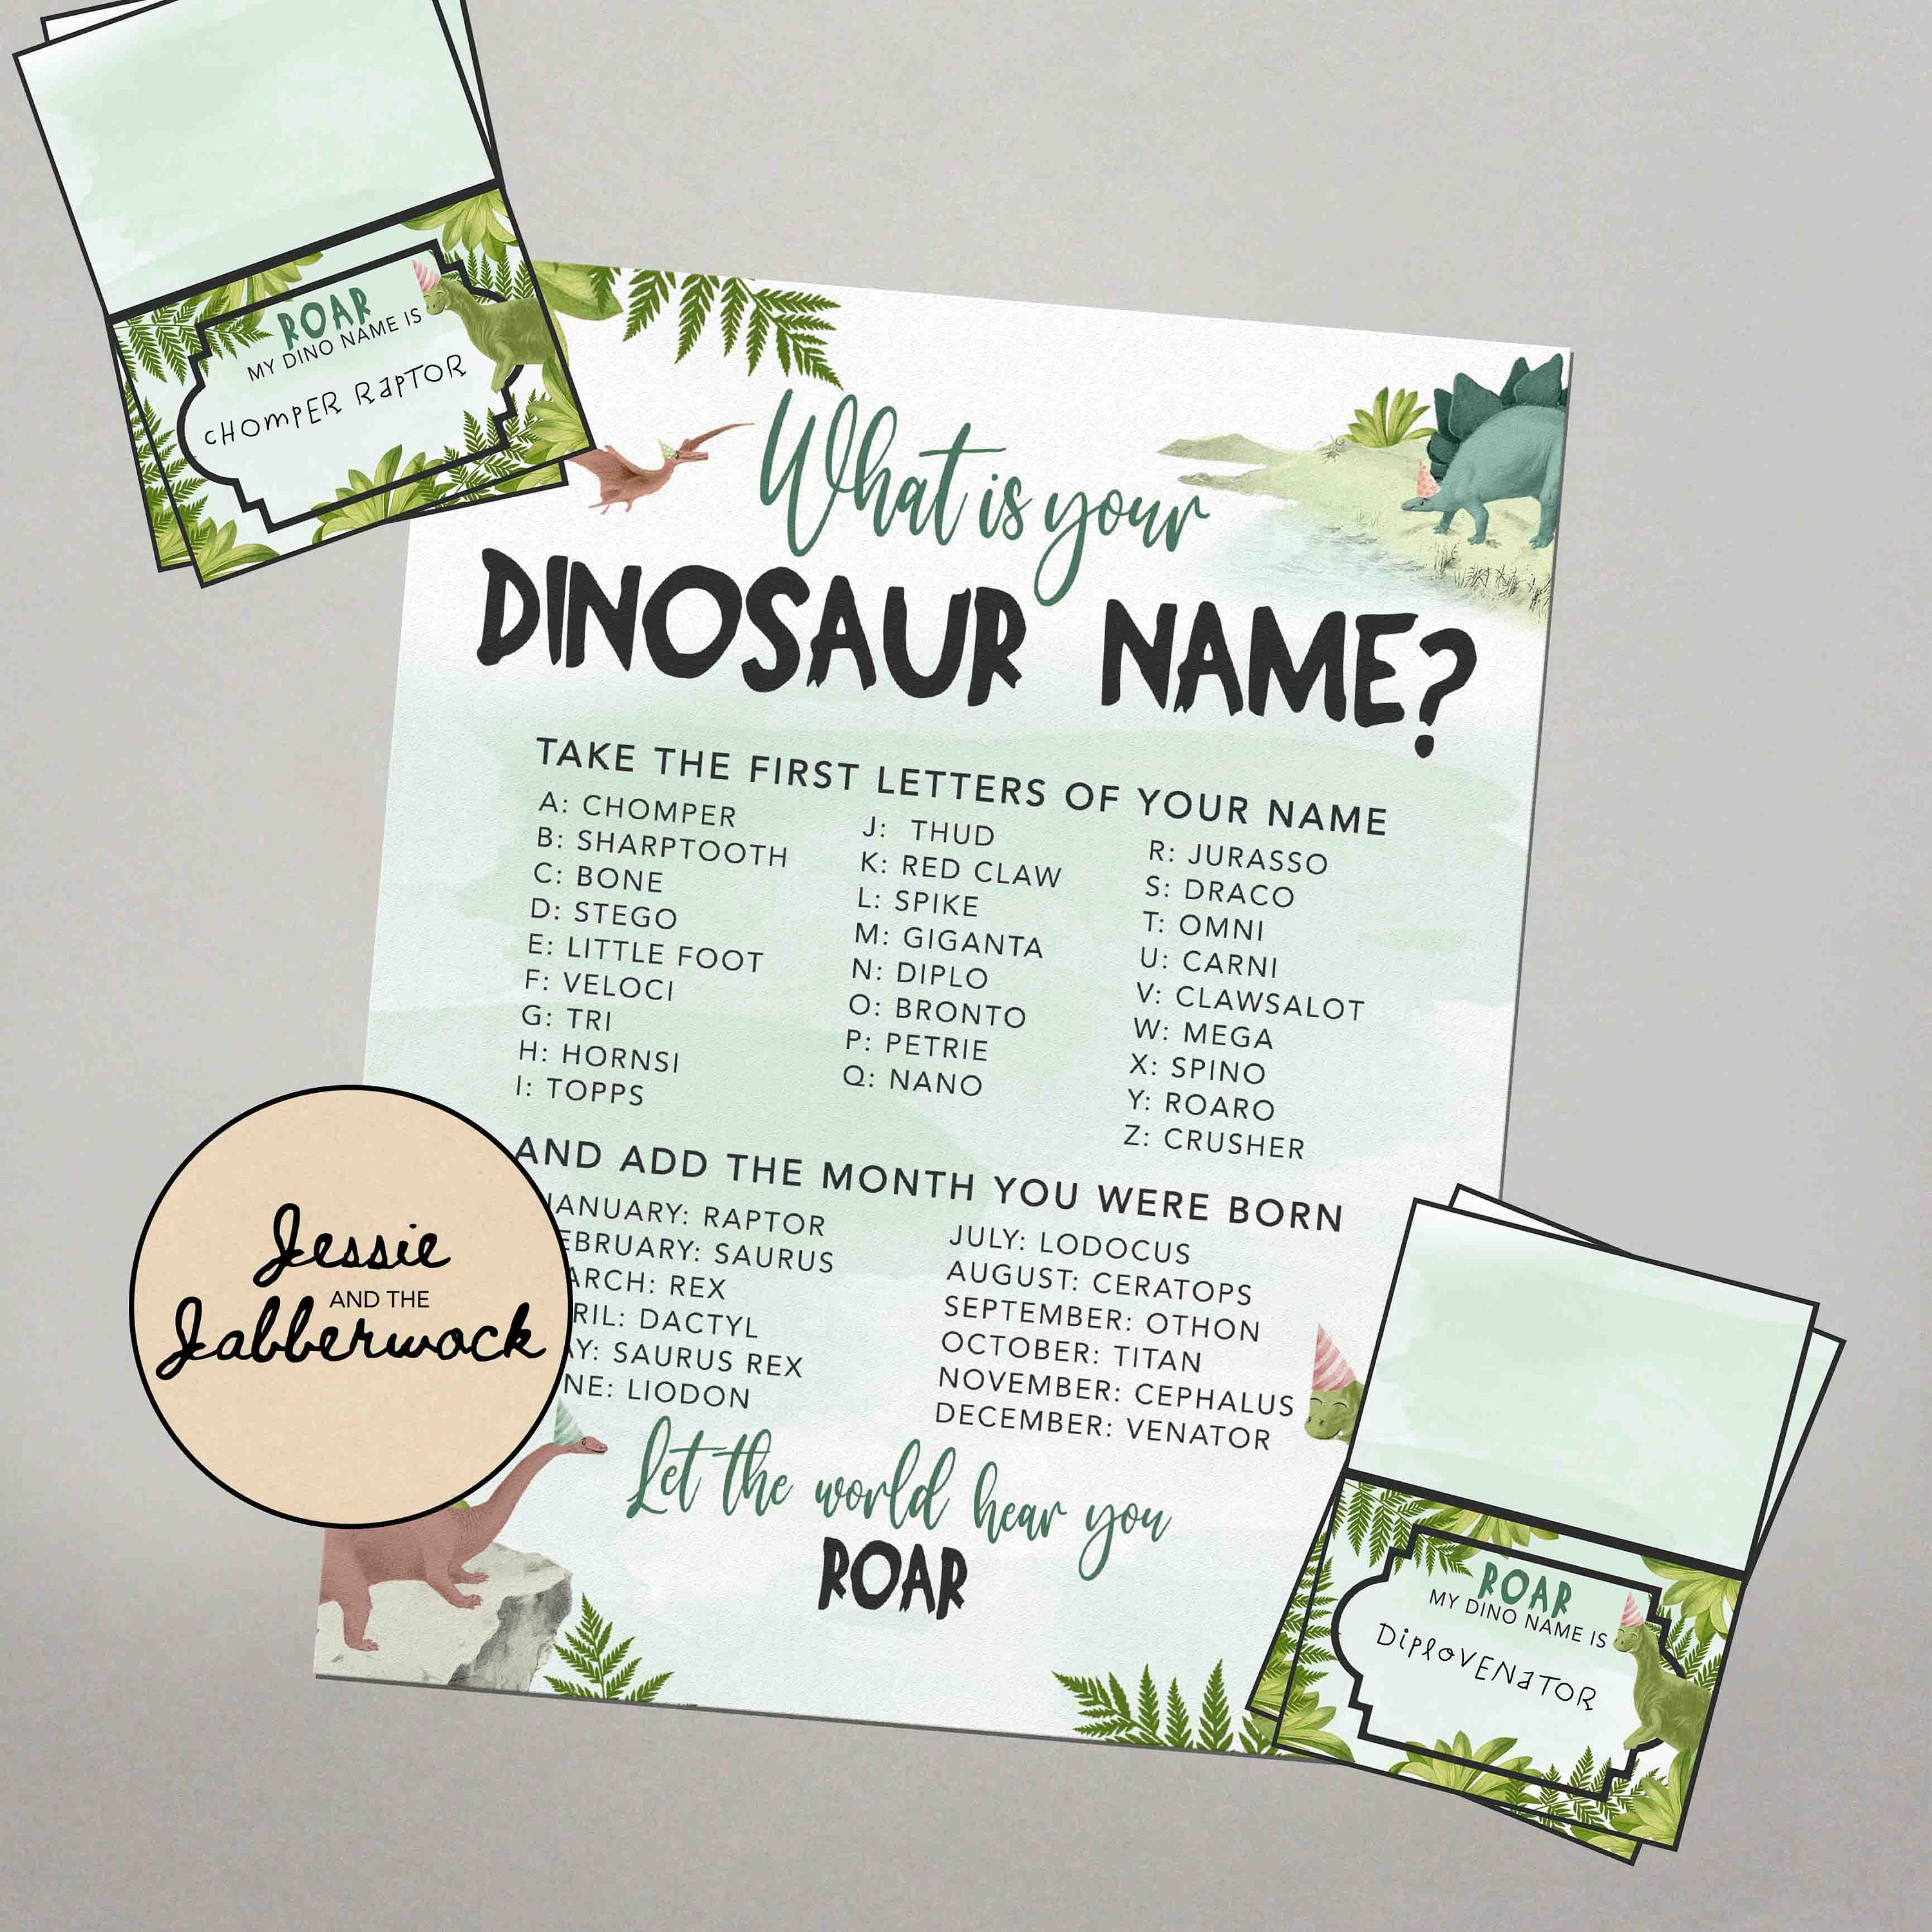 INSTANT DOWNLOAD Printable Pin the Tail on the Dinosaur 8x10 